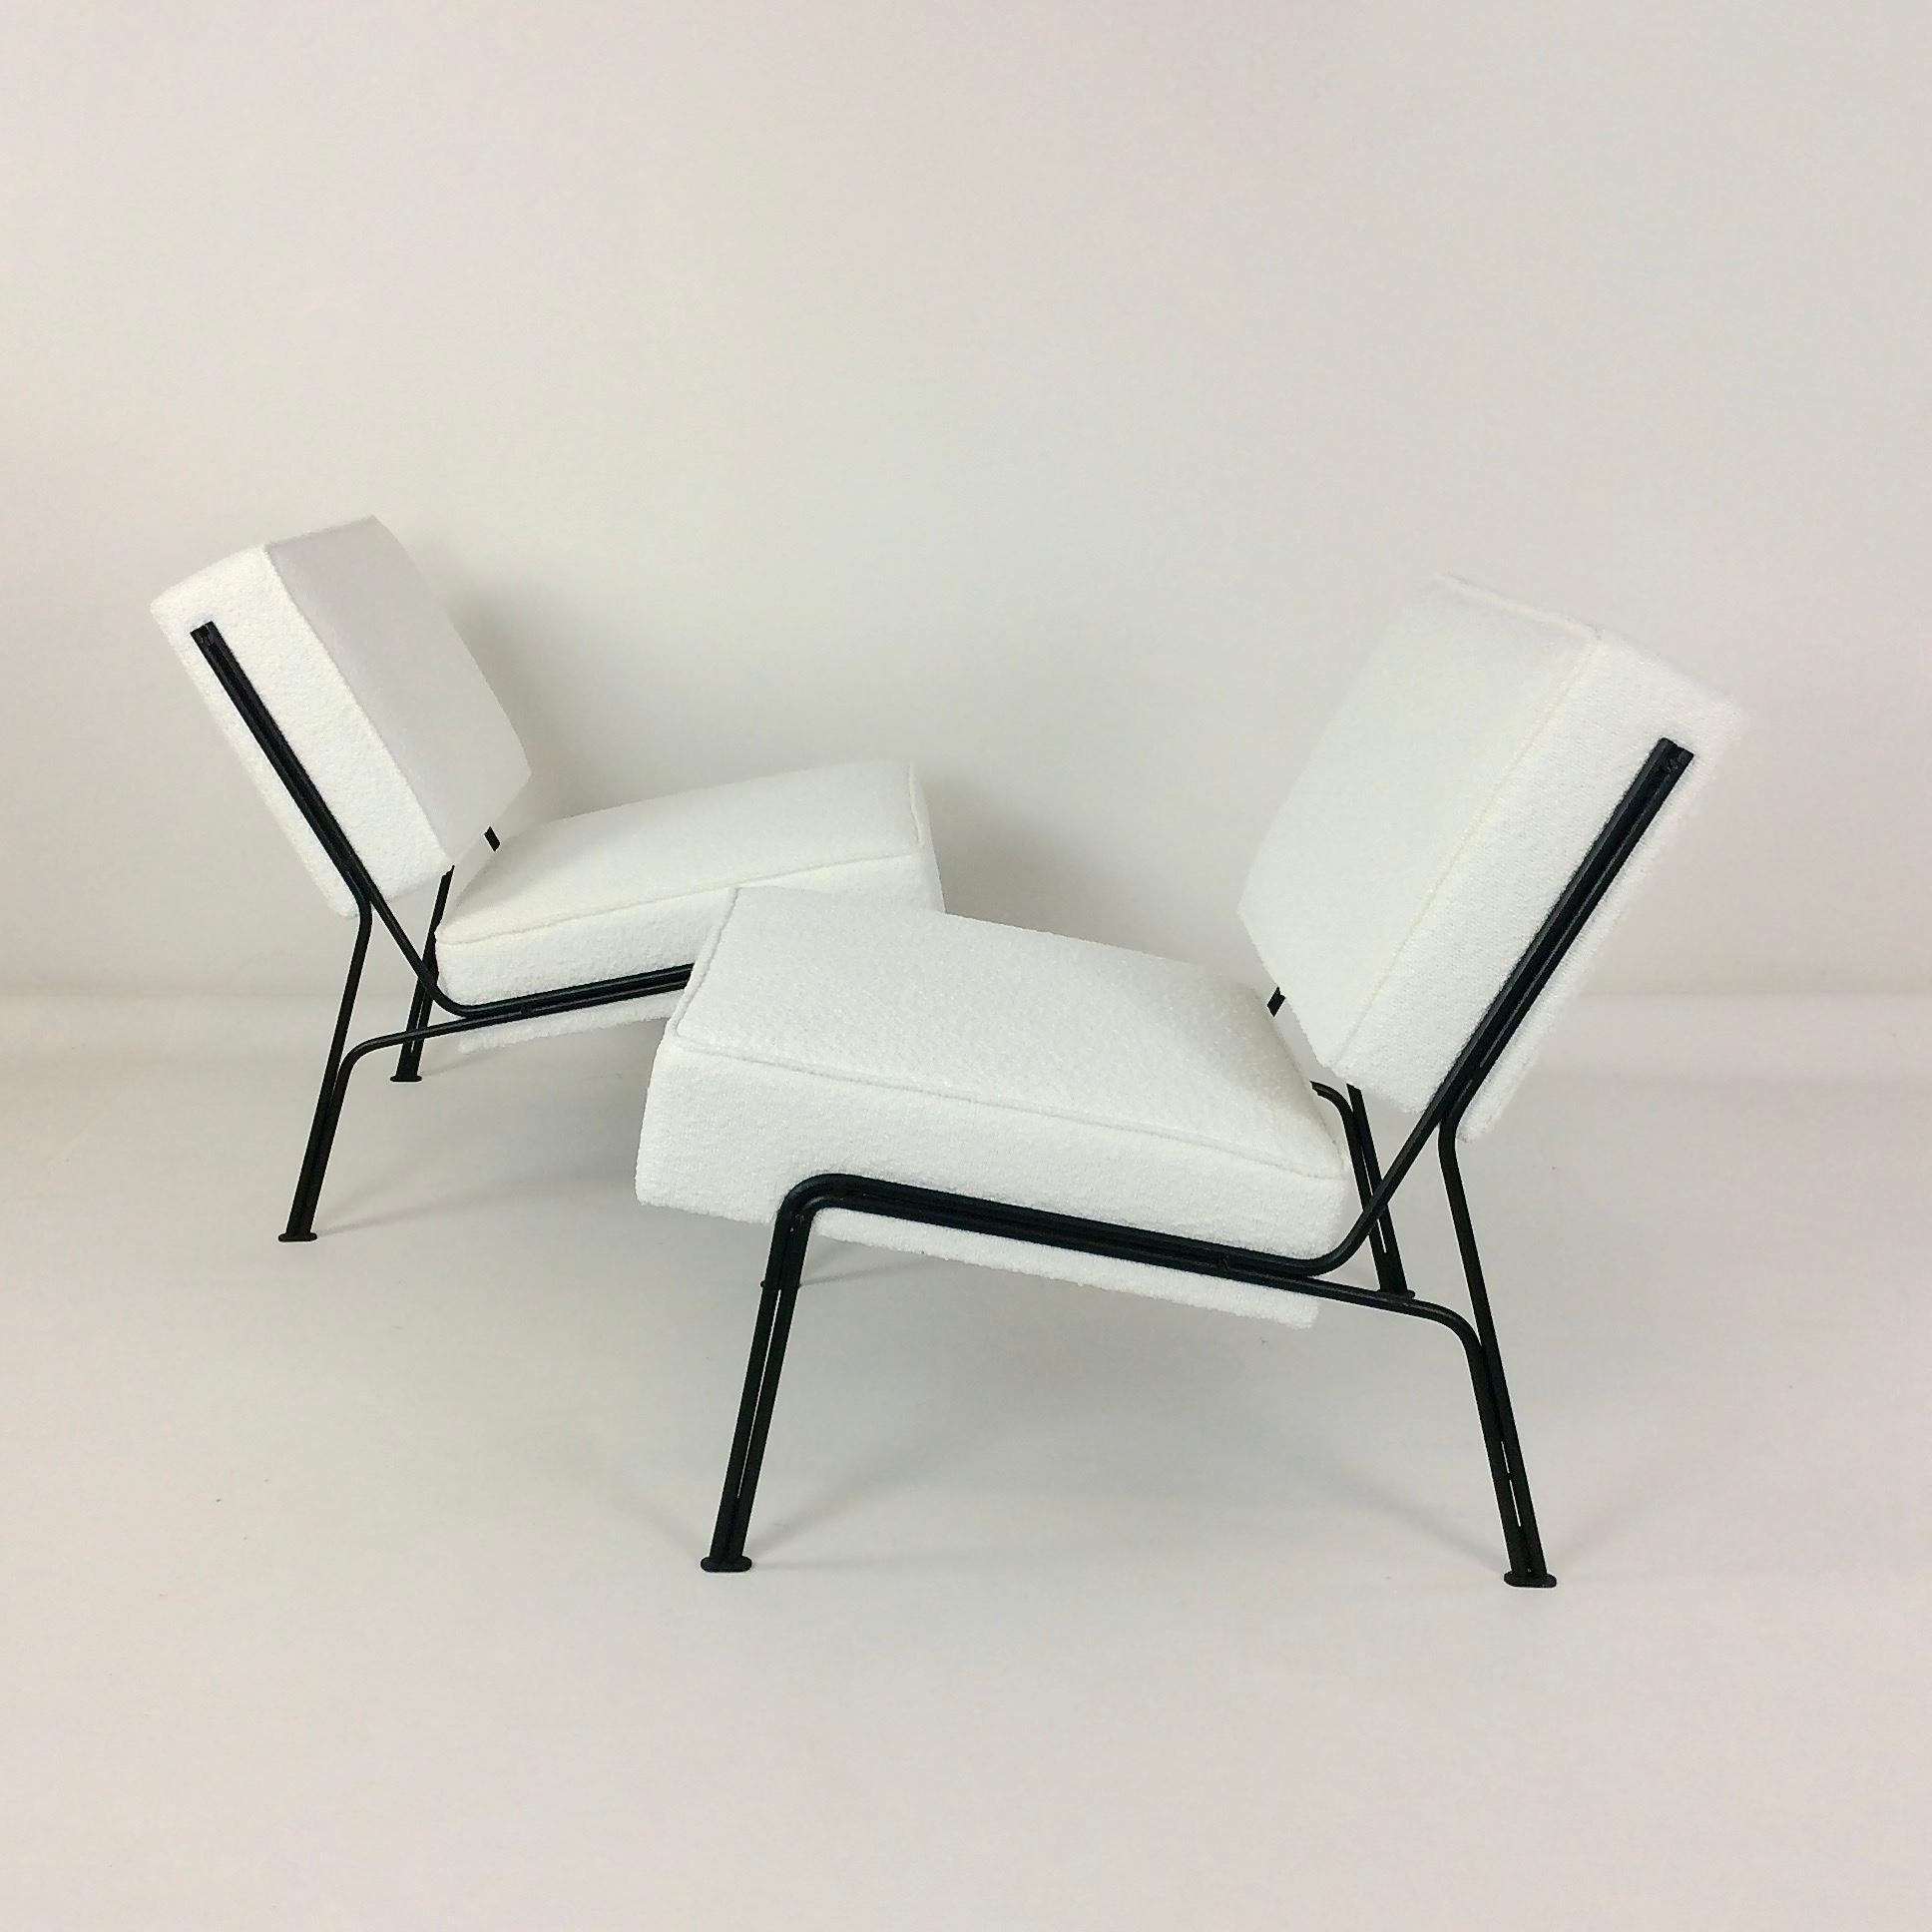 Metal Pair of G2 Chairs By A.R.P. Guariche, Motte, Mortier for Airborne, 1953, France.